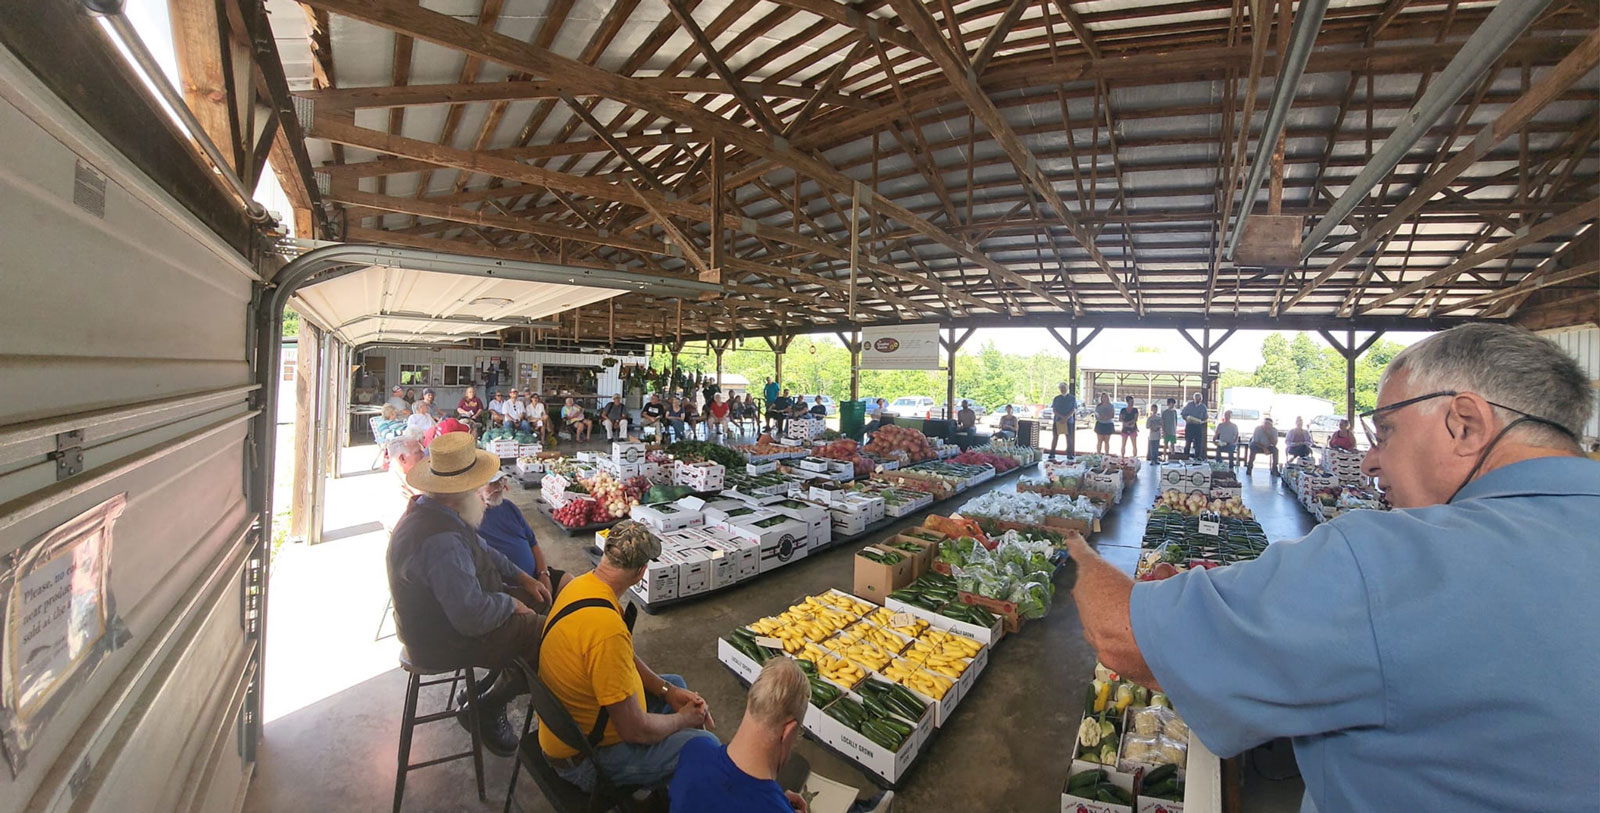 Farmers Market and Auction in Morgan County